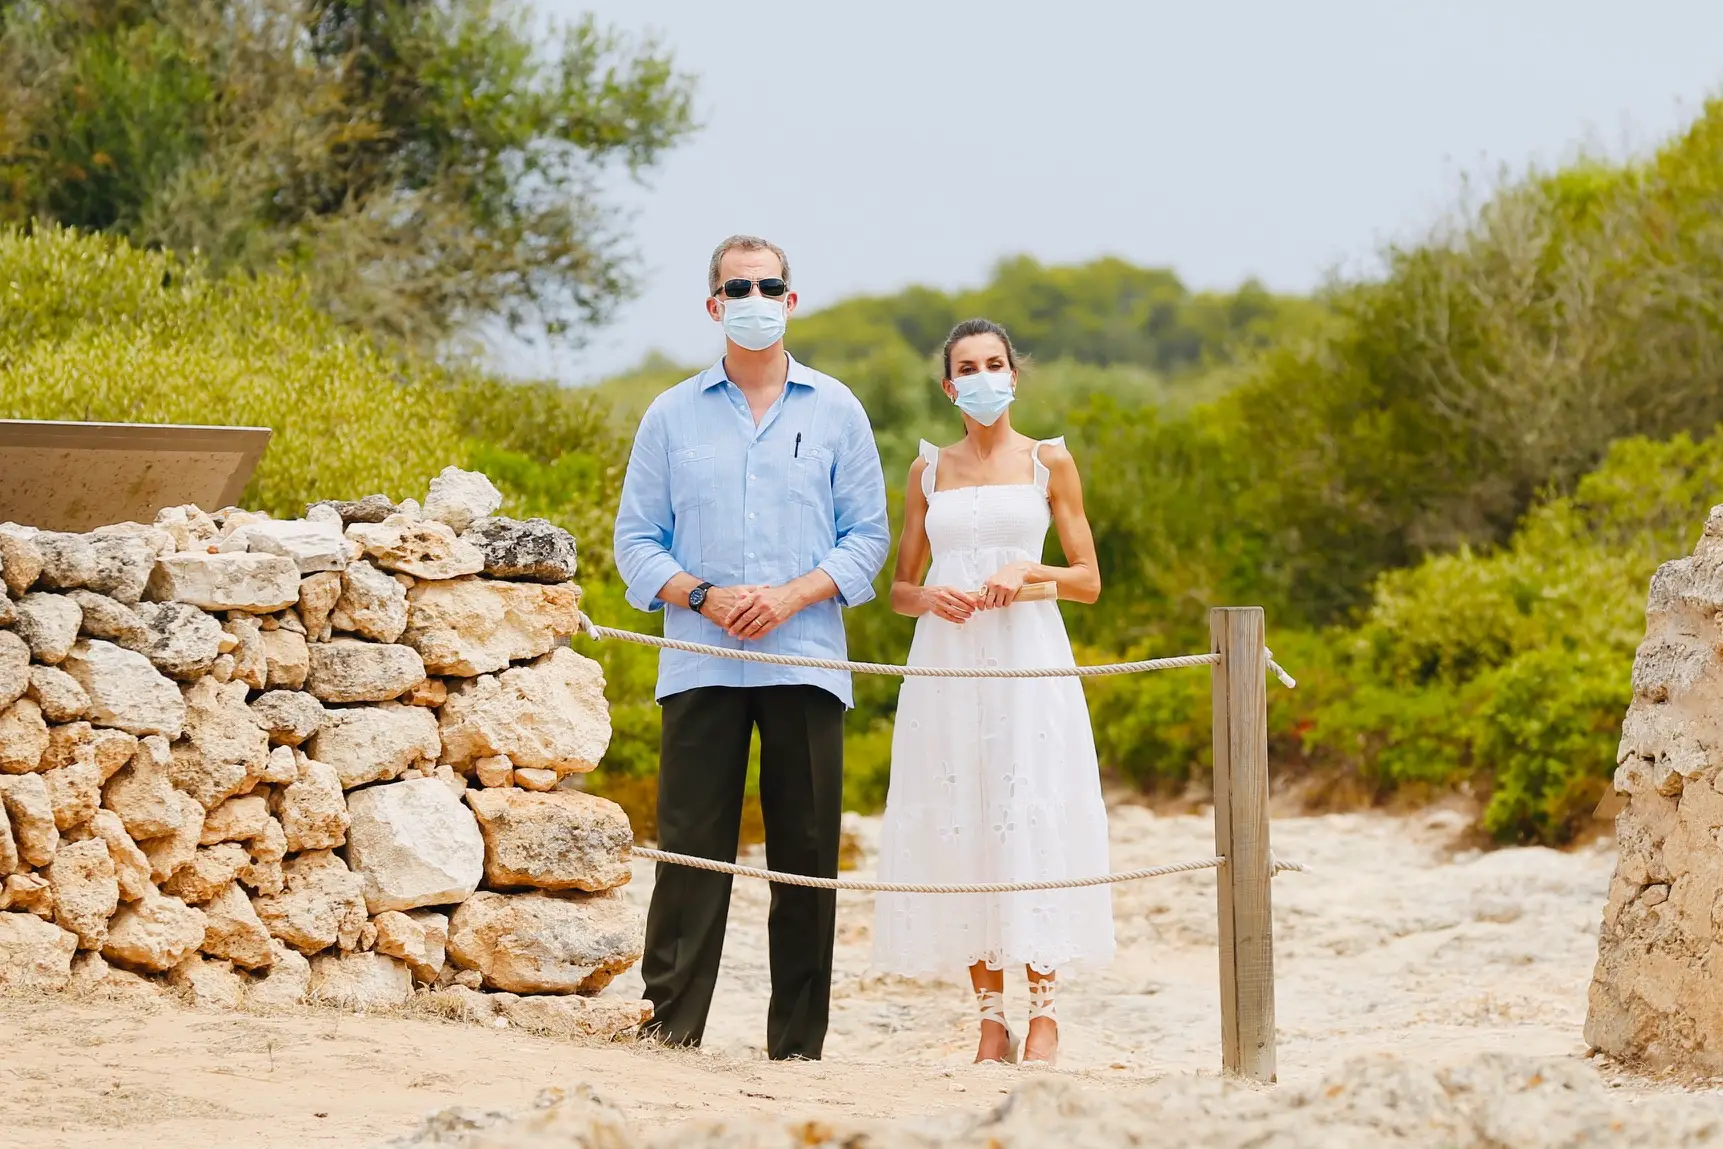 King Felipe and Queen Letizia of Spain during the tour of Island of Menorca in Palma